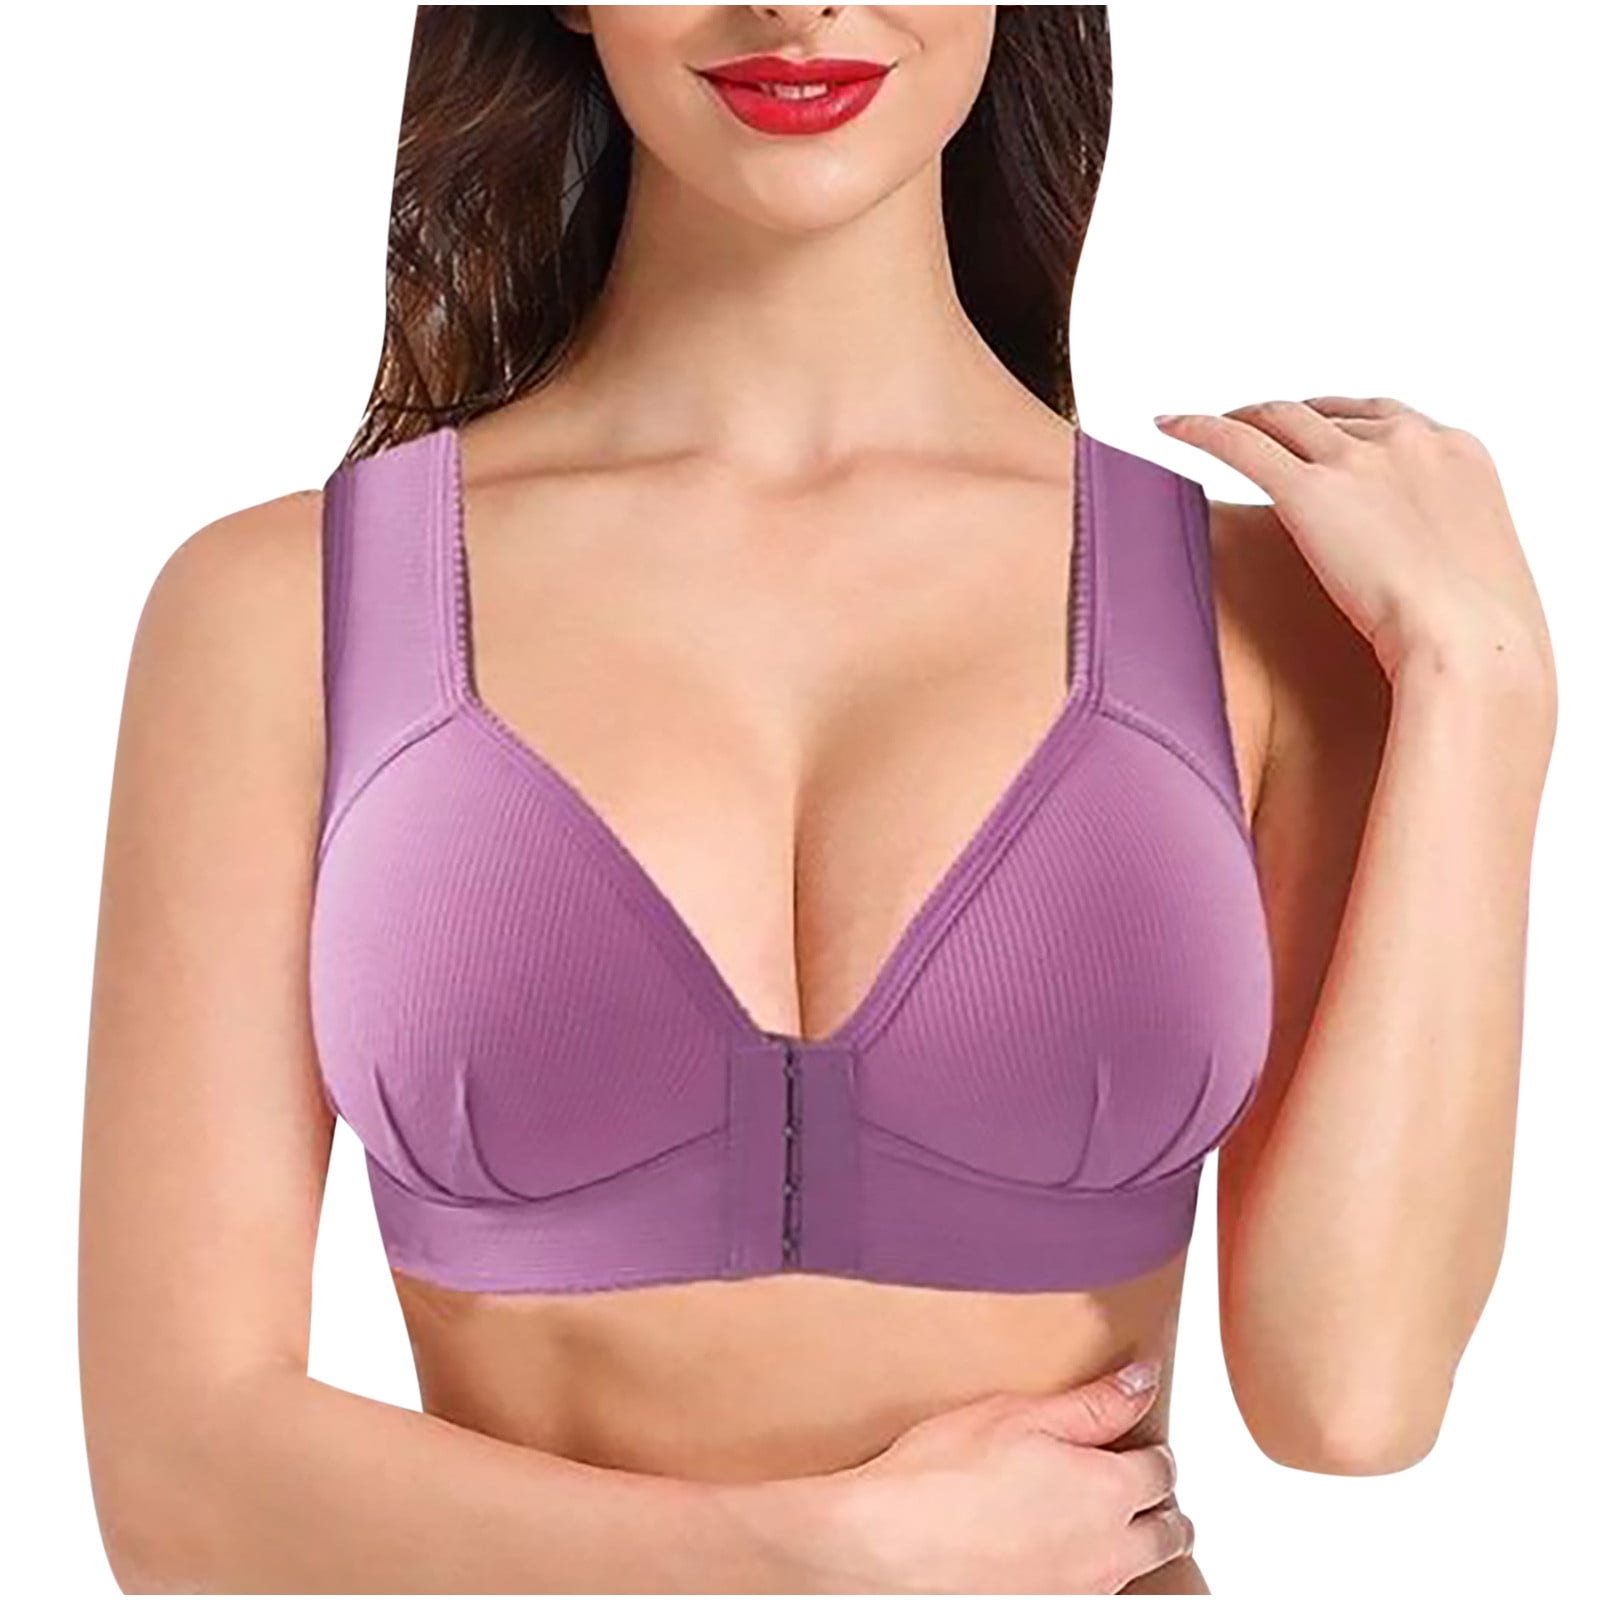 Plus Size Front Closure Elastic Push Up Comfort Bra,Women's Wirefree Lace Bra,Everyday Bras for Women